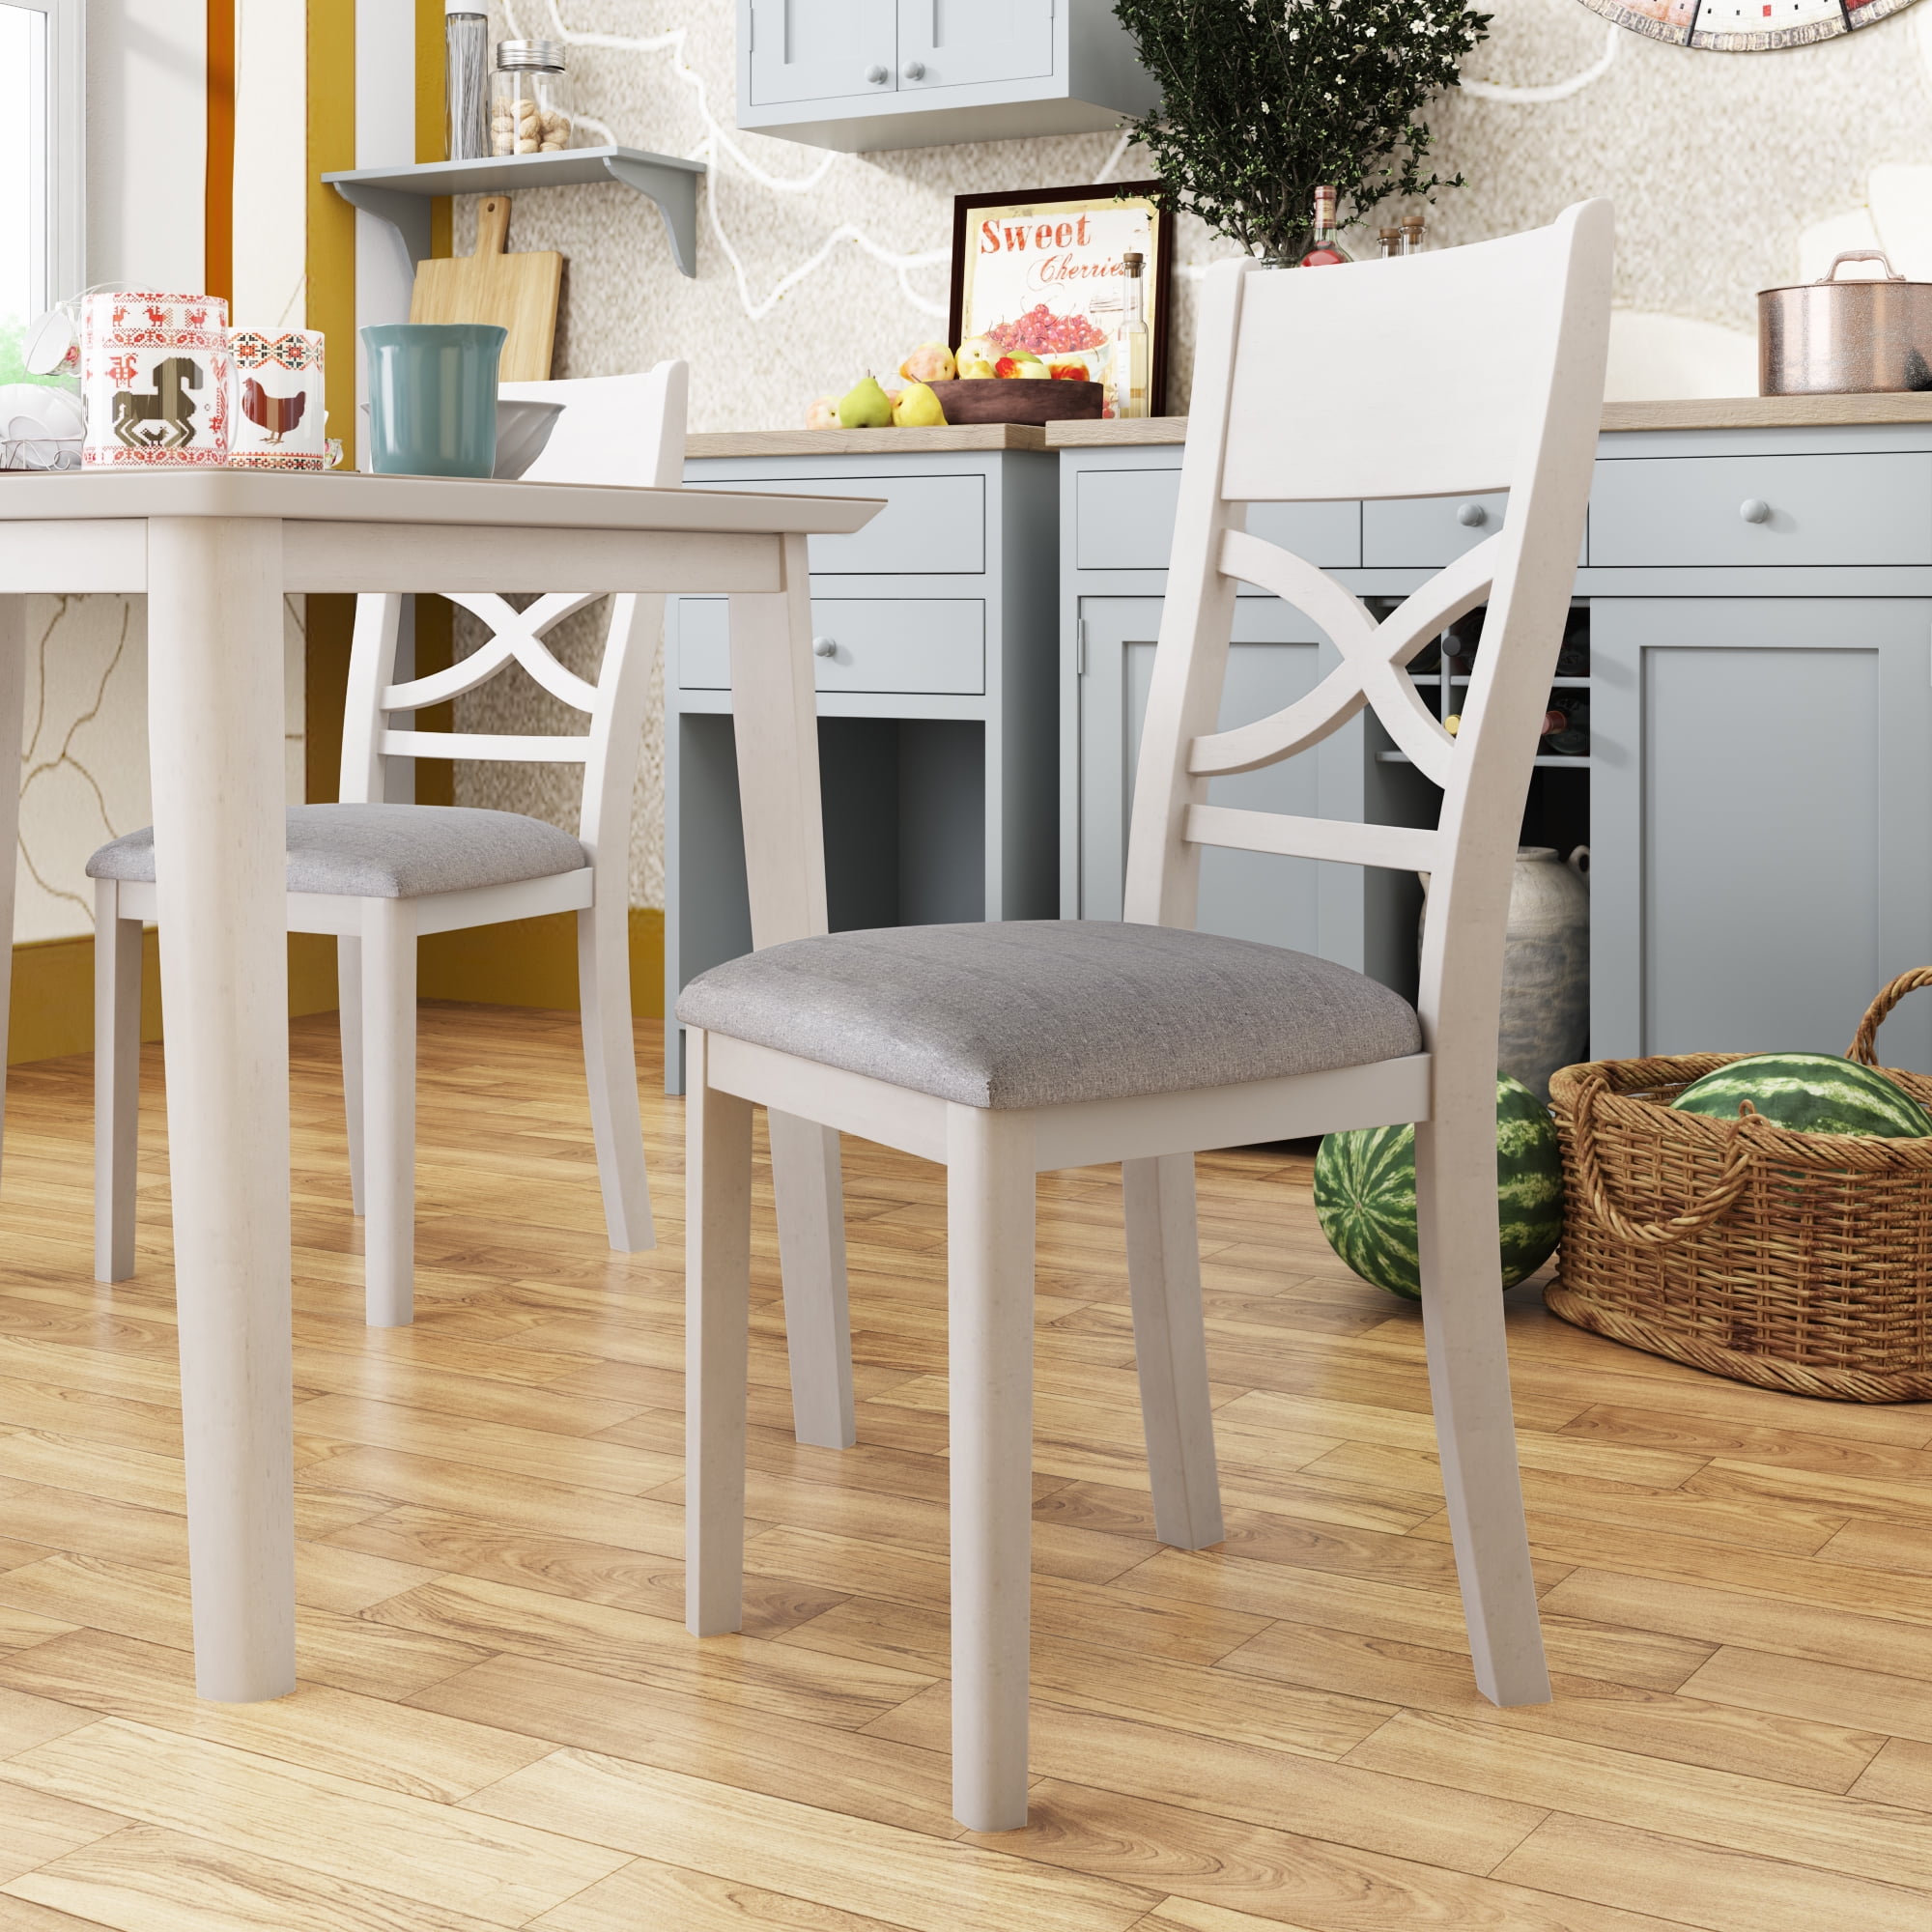 Dining Chairs Set For 4 Wooden, Grey Dining Room Chairs Set Of 4